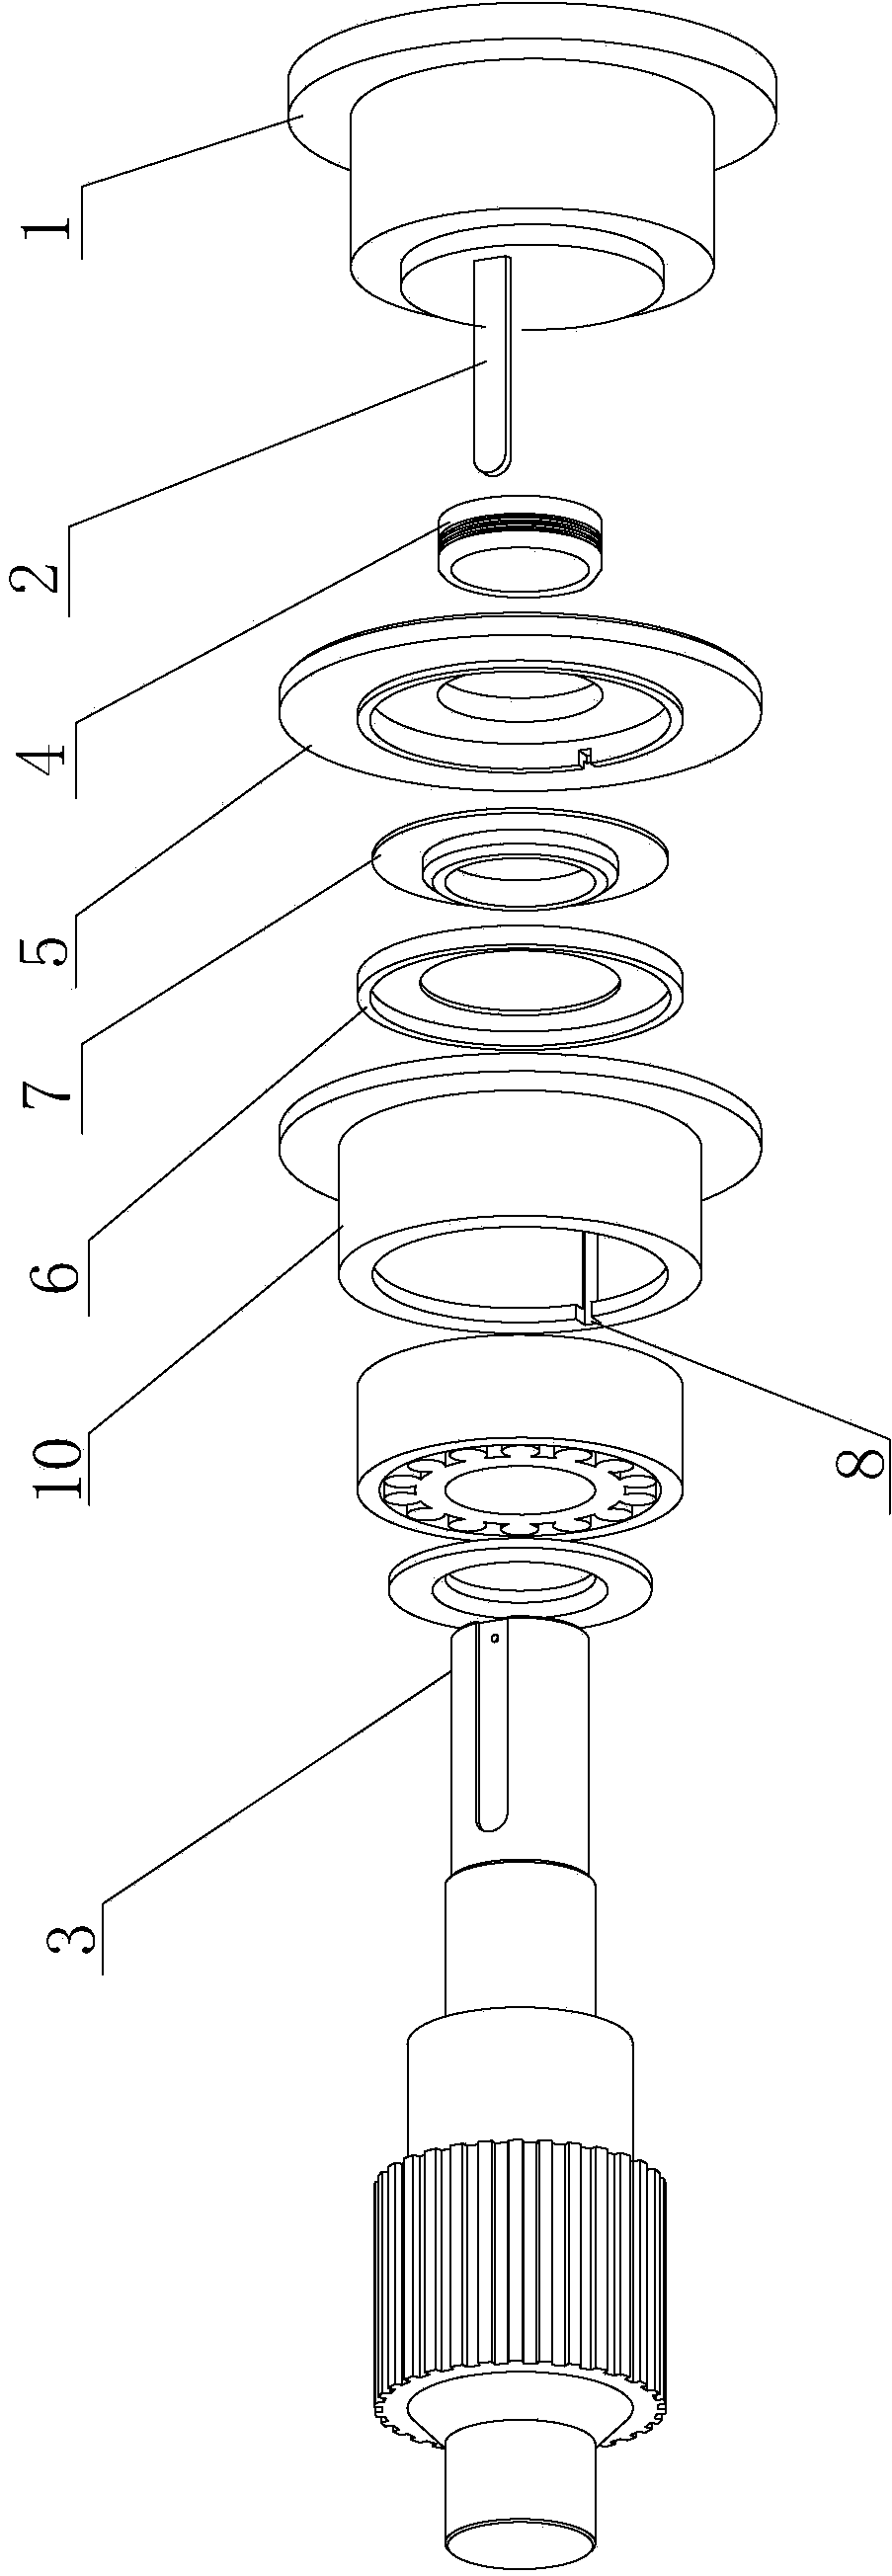 Non-contact seal device for high-speed shaft of gear speed reducer